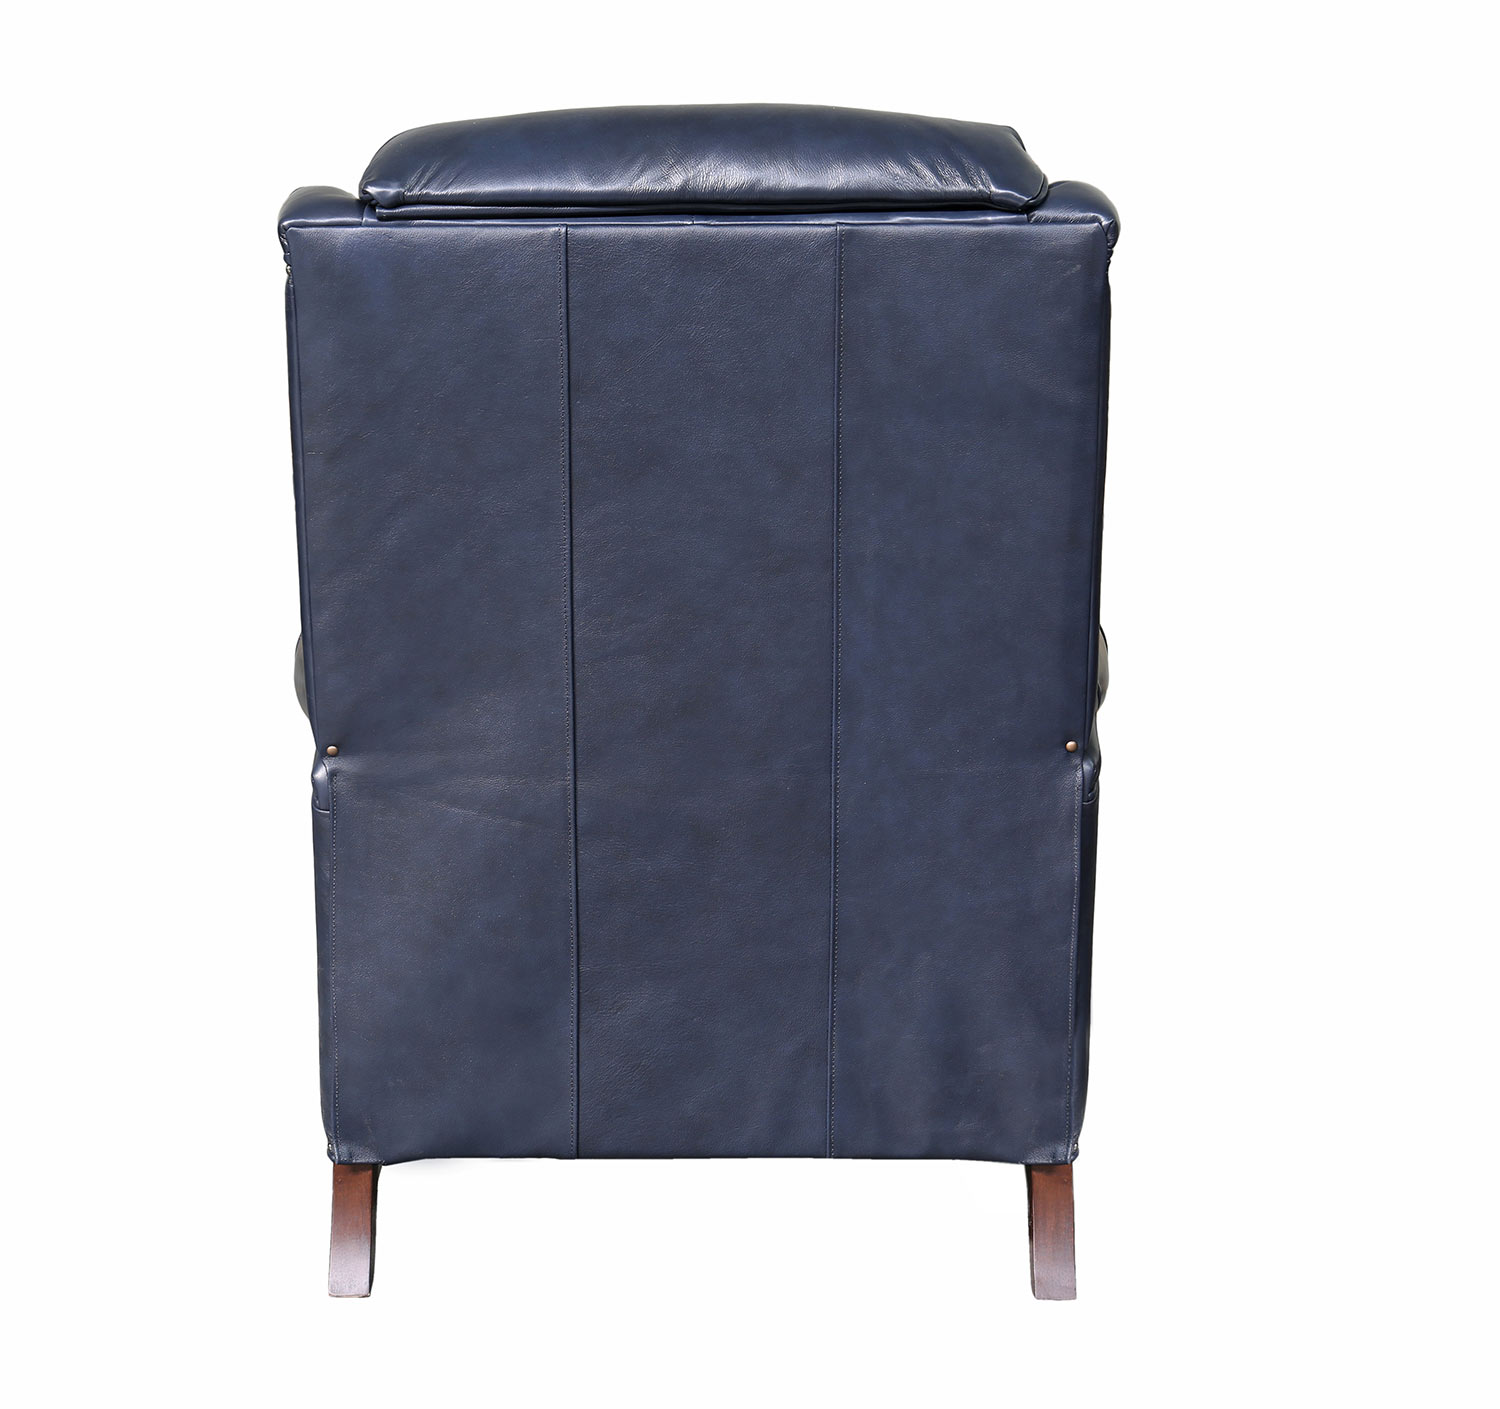 Barcalounger Thornfield Power Recliner Chair with Power Head Rest - Shoreham Blue/All Leather